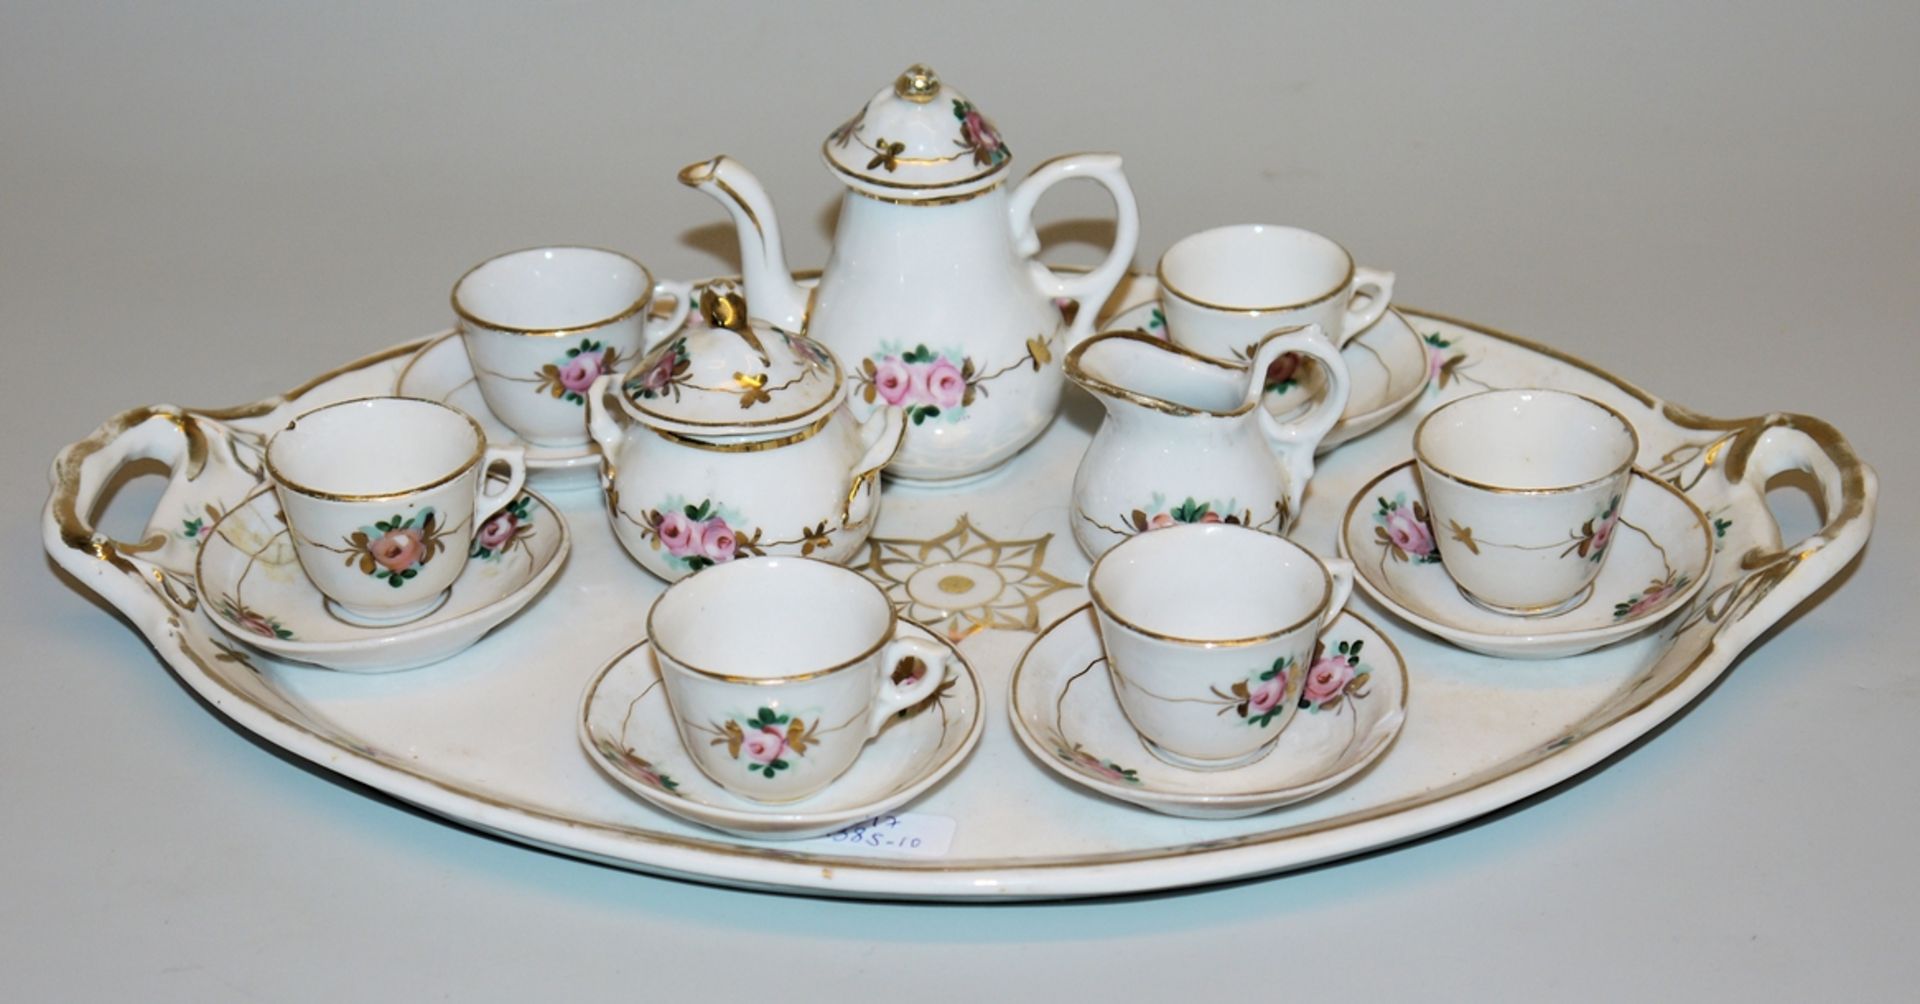 Porcelain coffee service for the doll's house around 1900